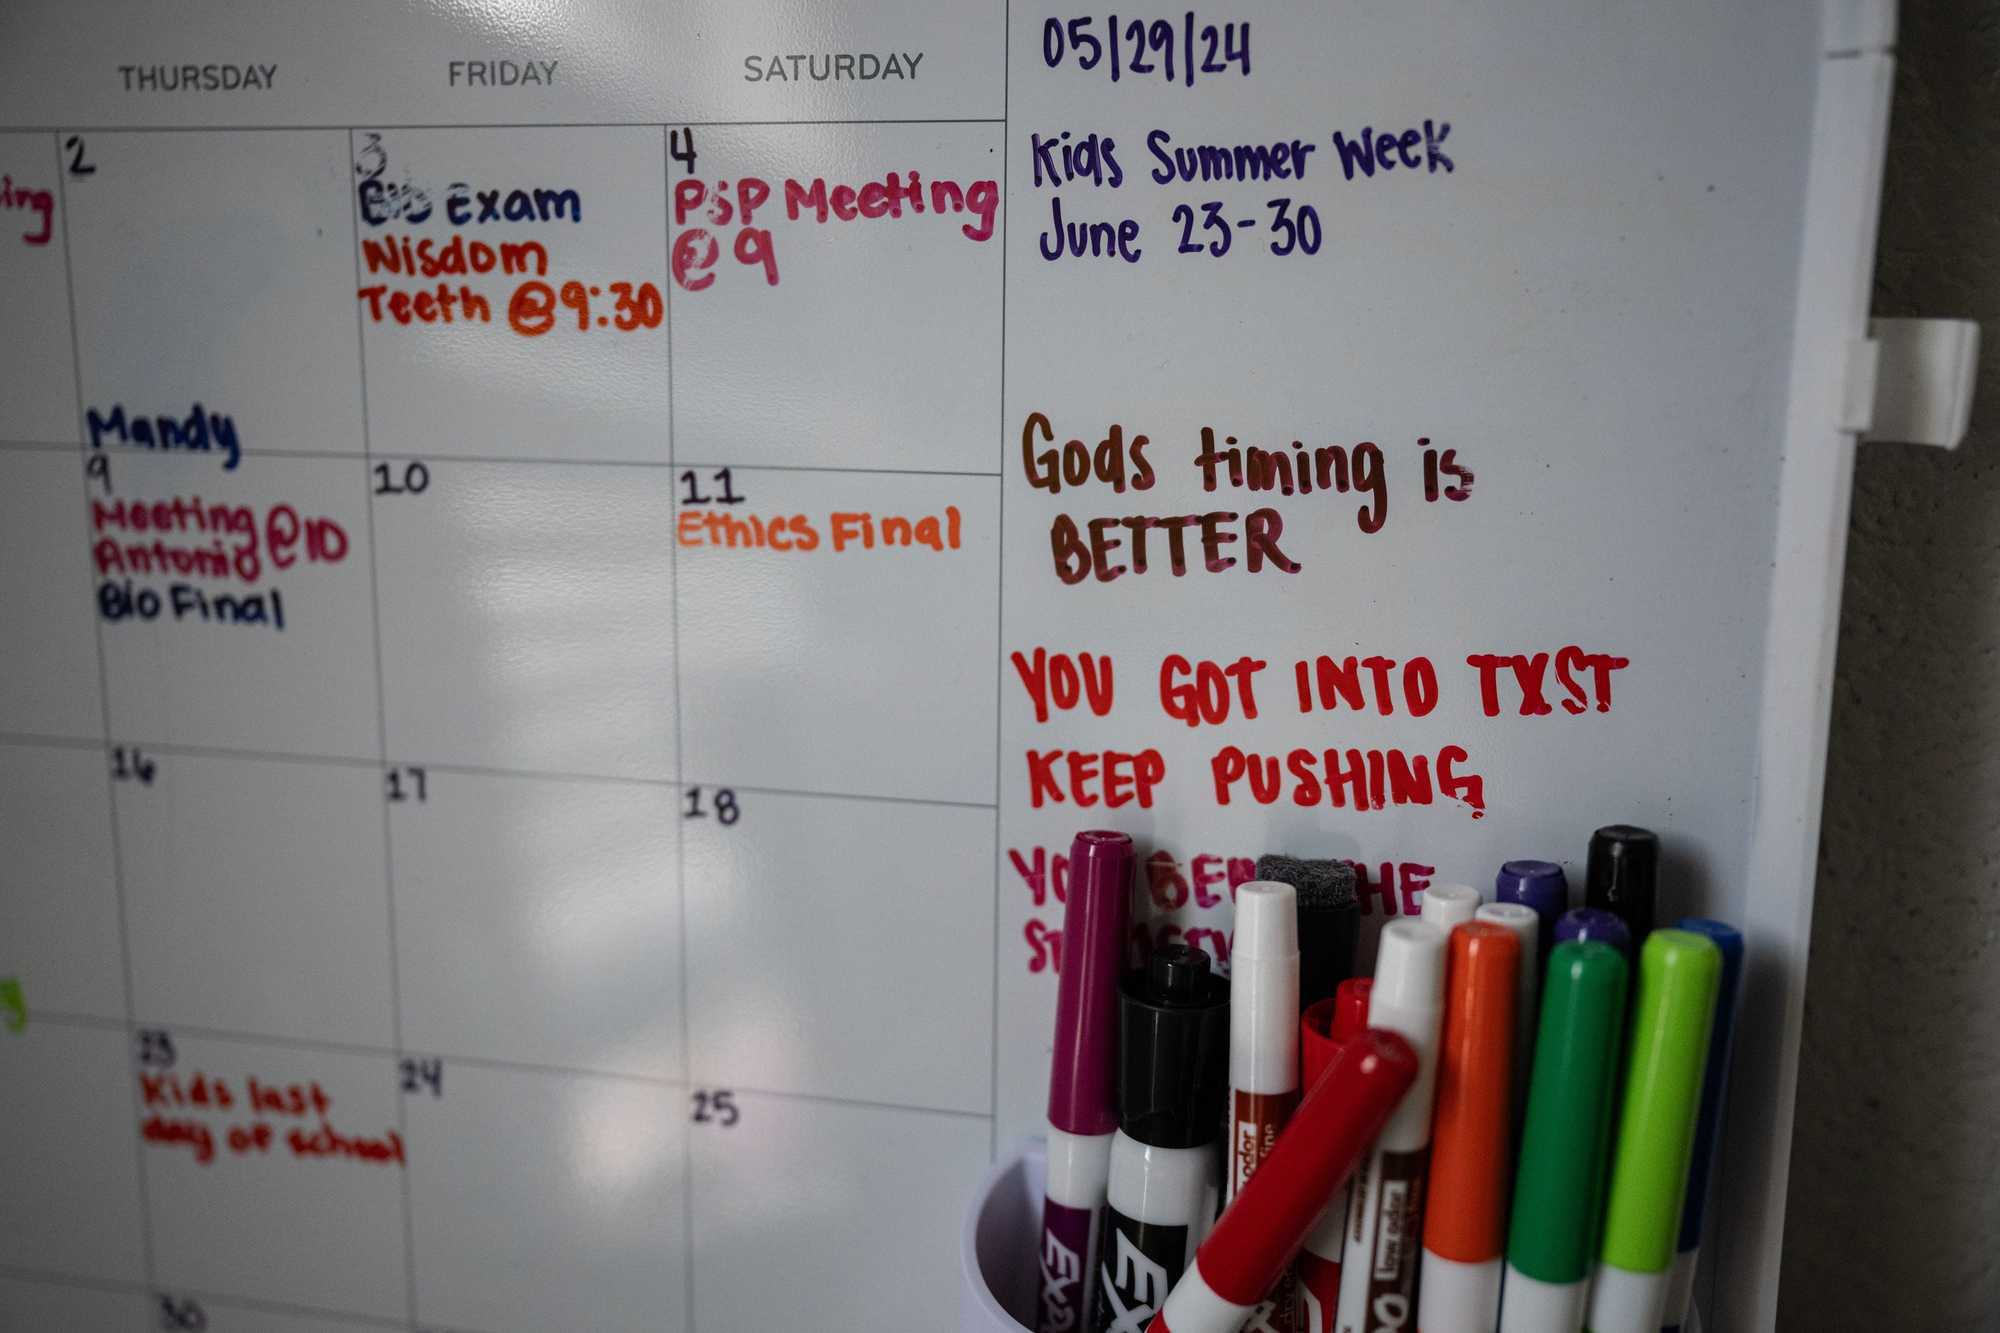 Osuna wrote encouraging messages on her calendar about her faith and admission into Texas State University at her apartment in Hutto, Texas. (Tamir Kalifa for The Boston Globe)